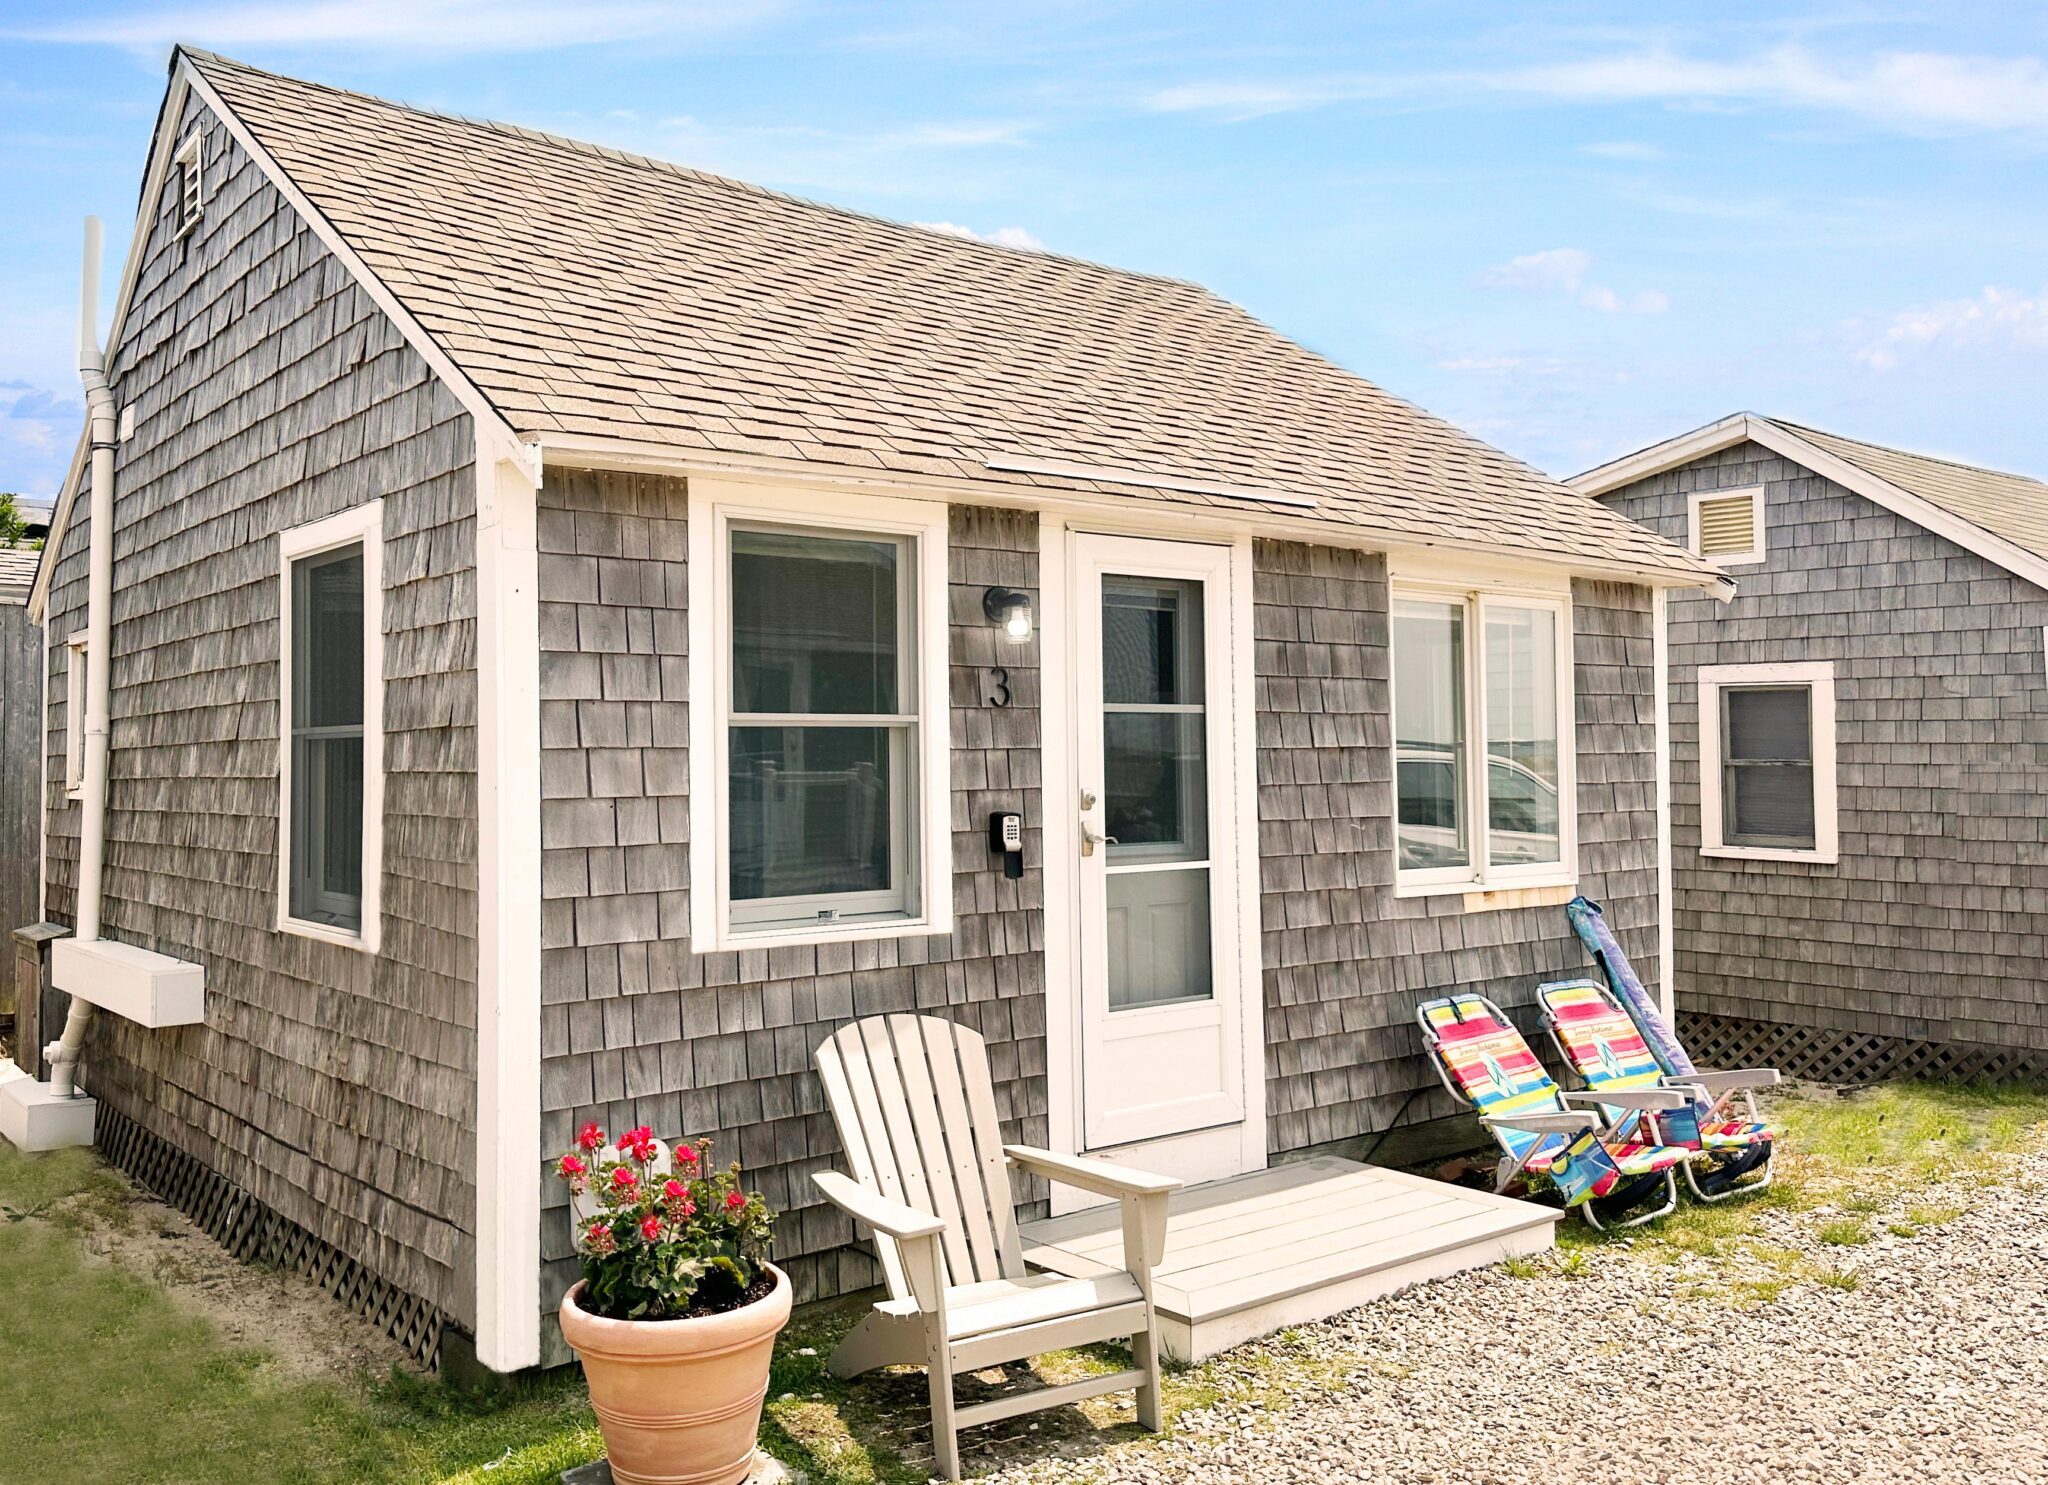 A shingled beach cottage with white trim.